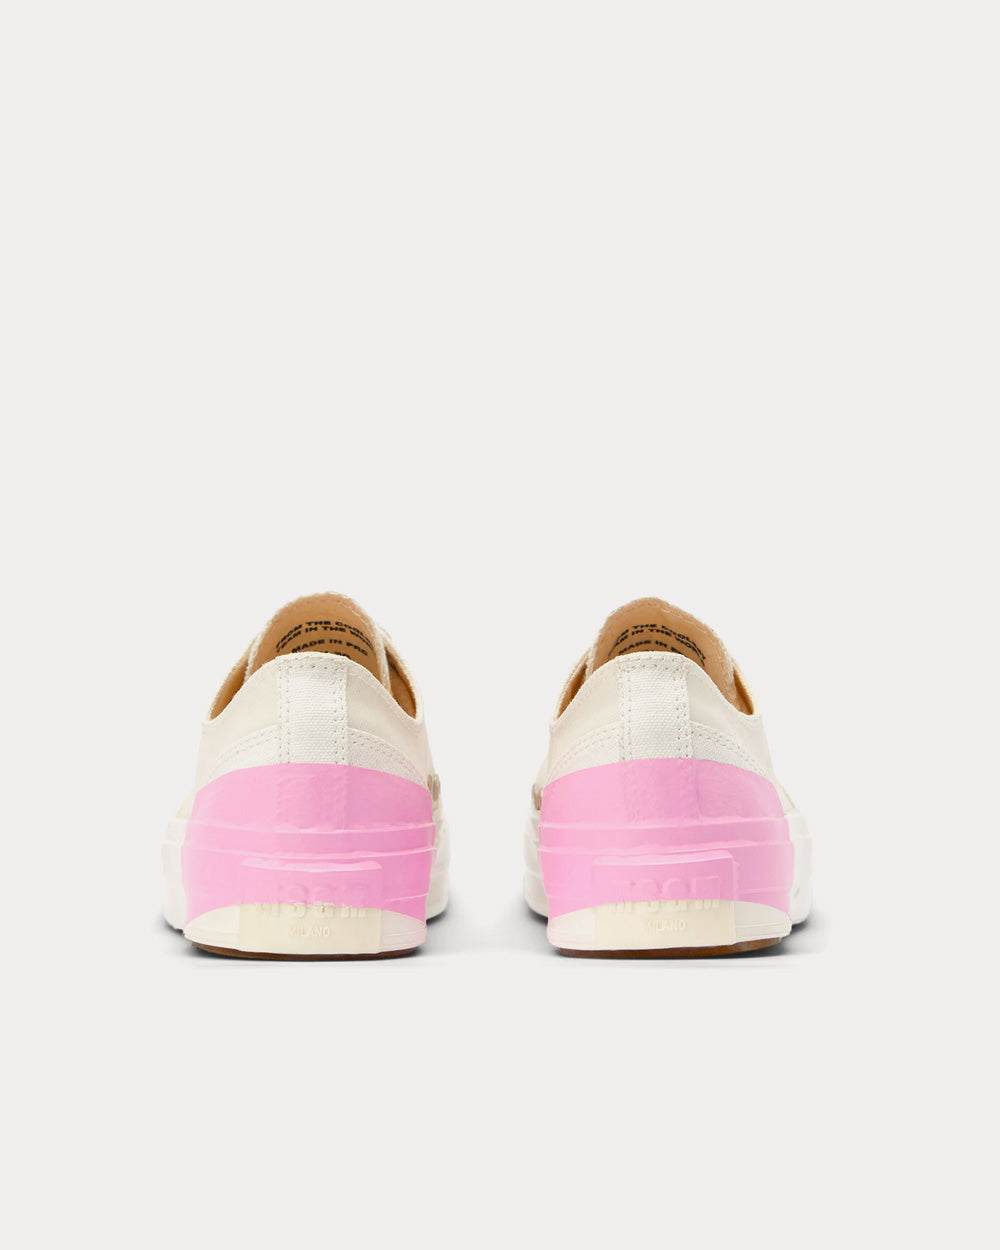 MSGM - Tape Appliqued Vulcanized Canvas White / Pink Low Top Sneakers